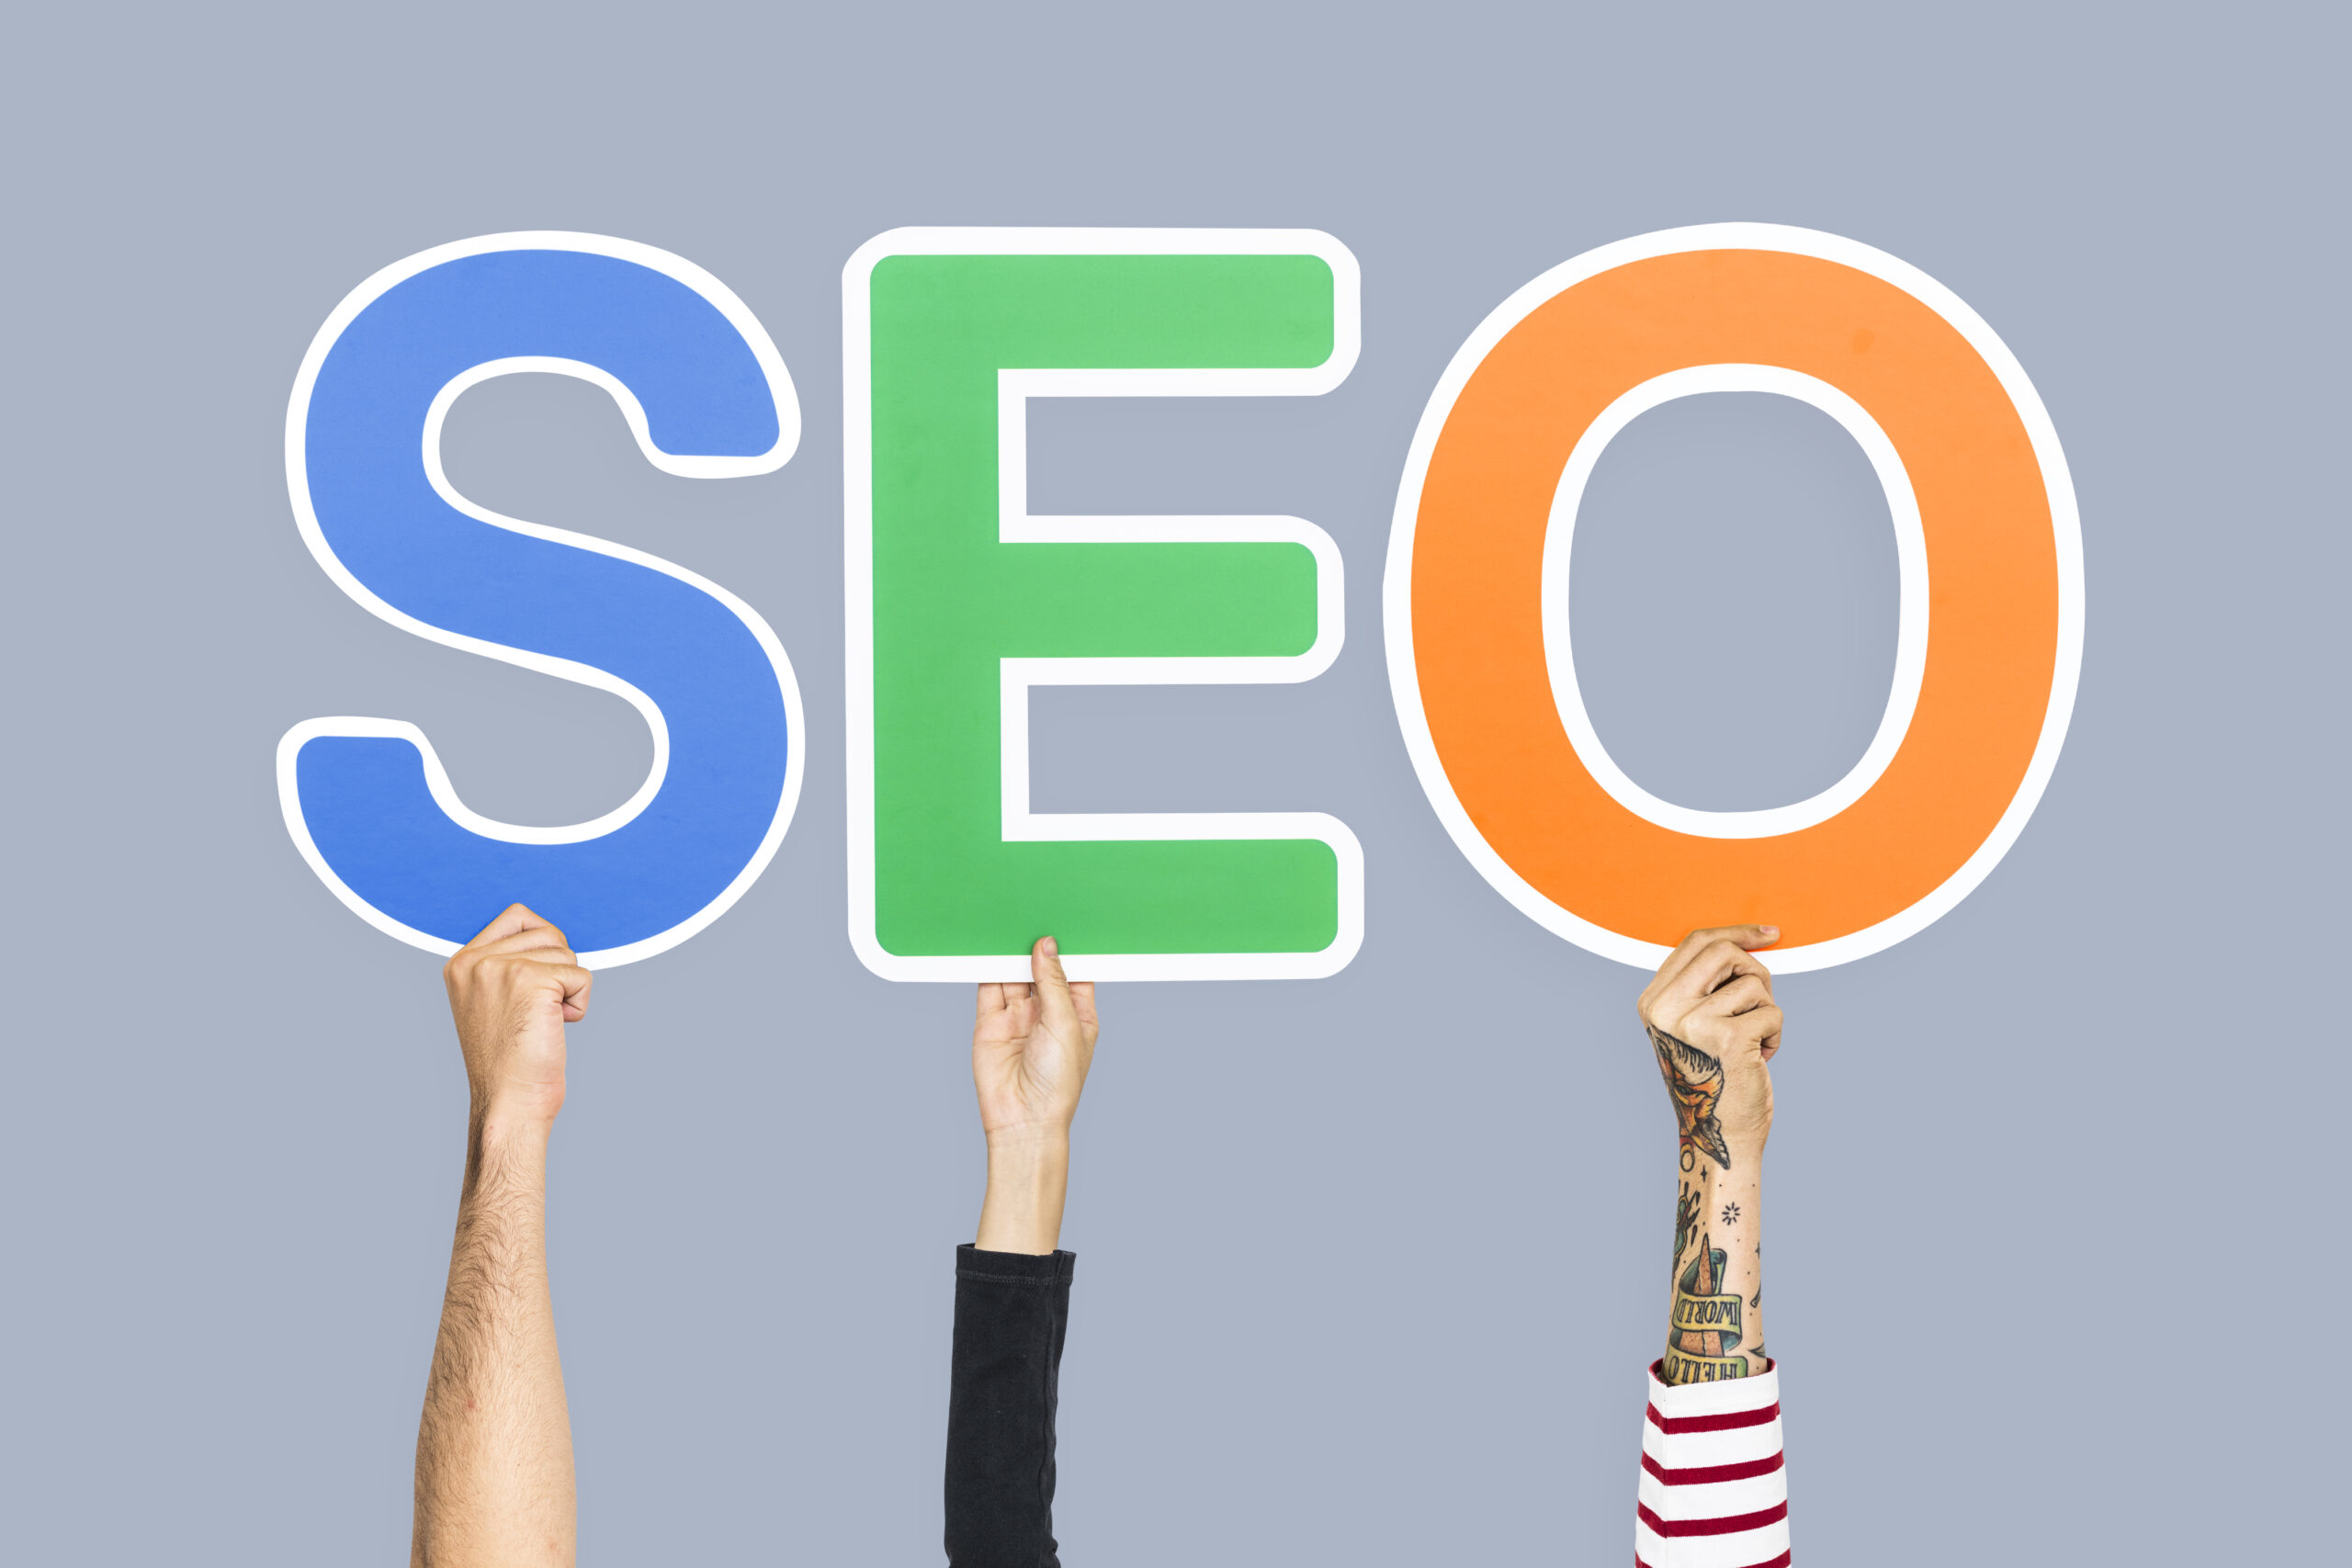 How to Grow Your Business with a Pearland SEO Expert